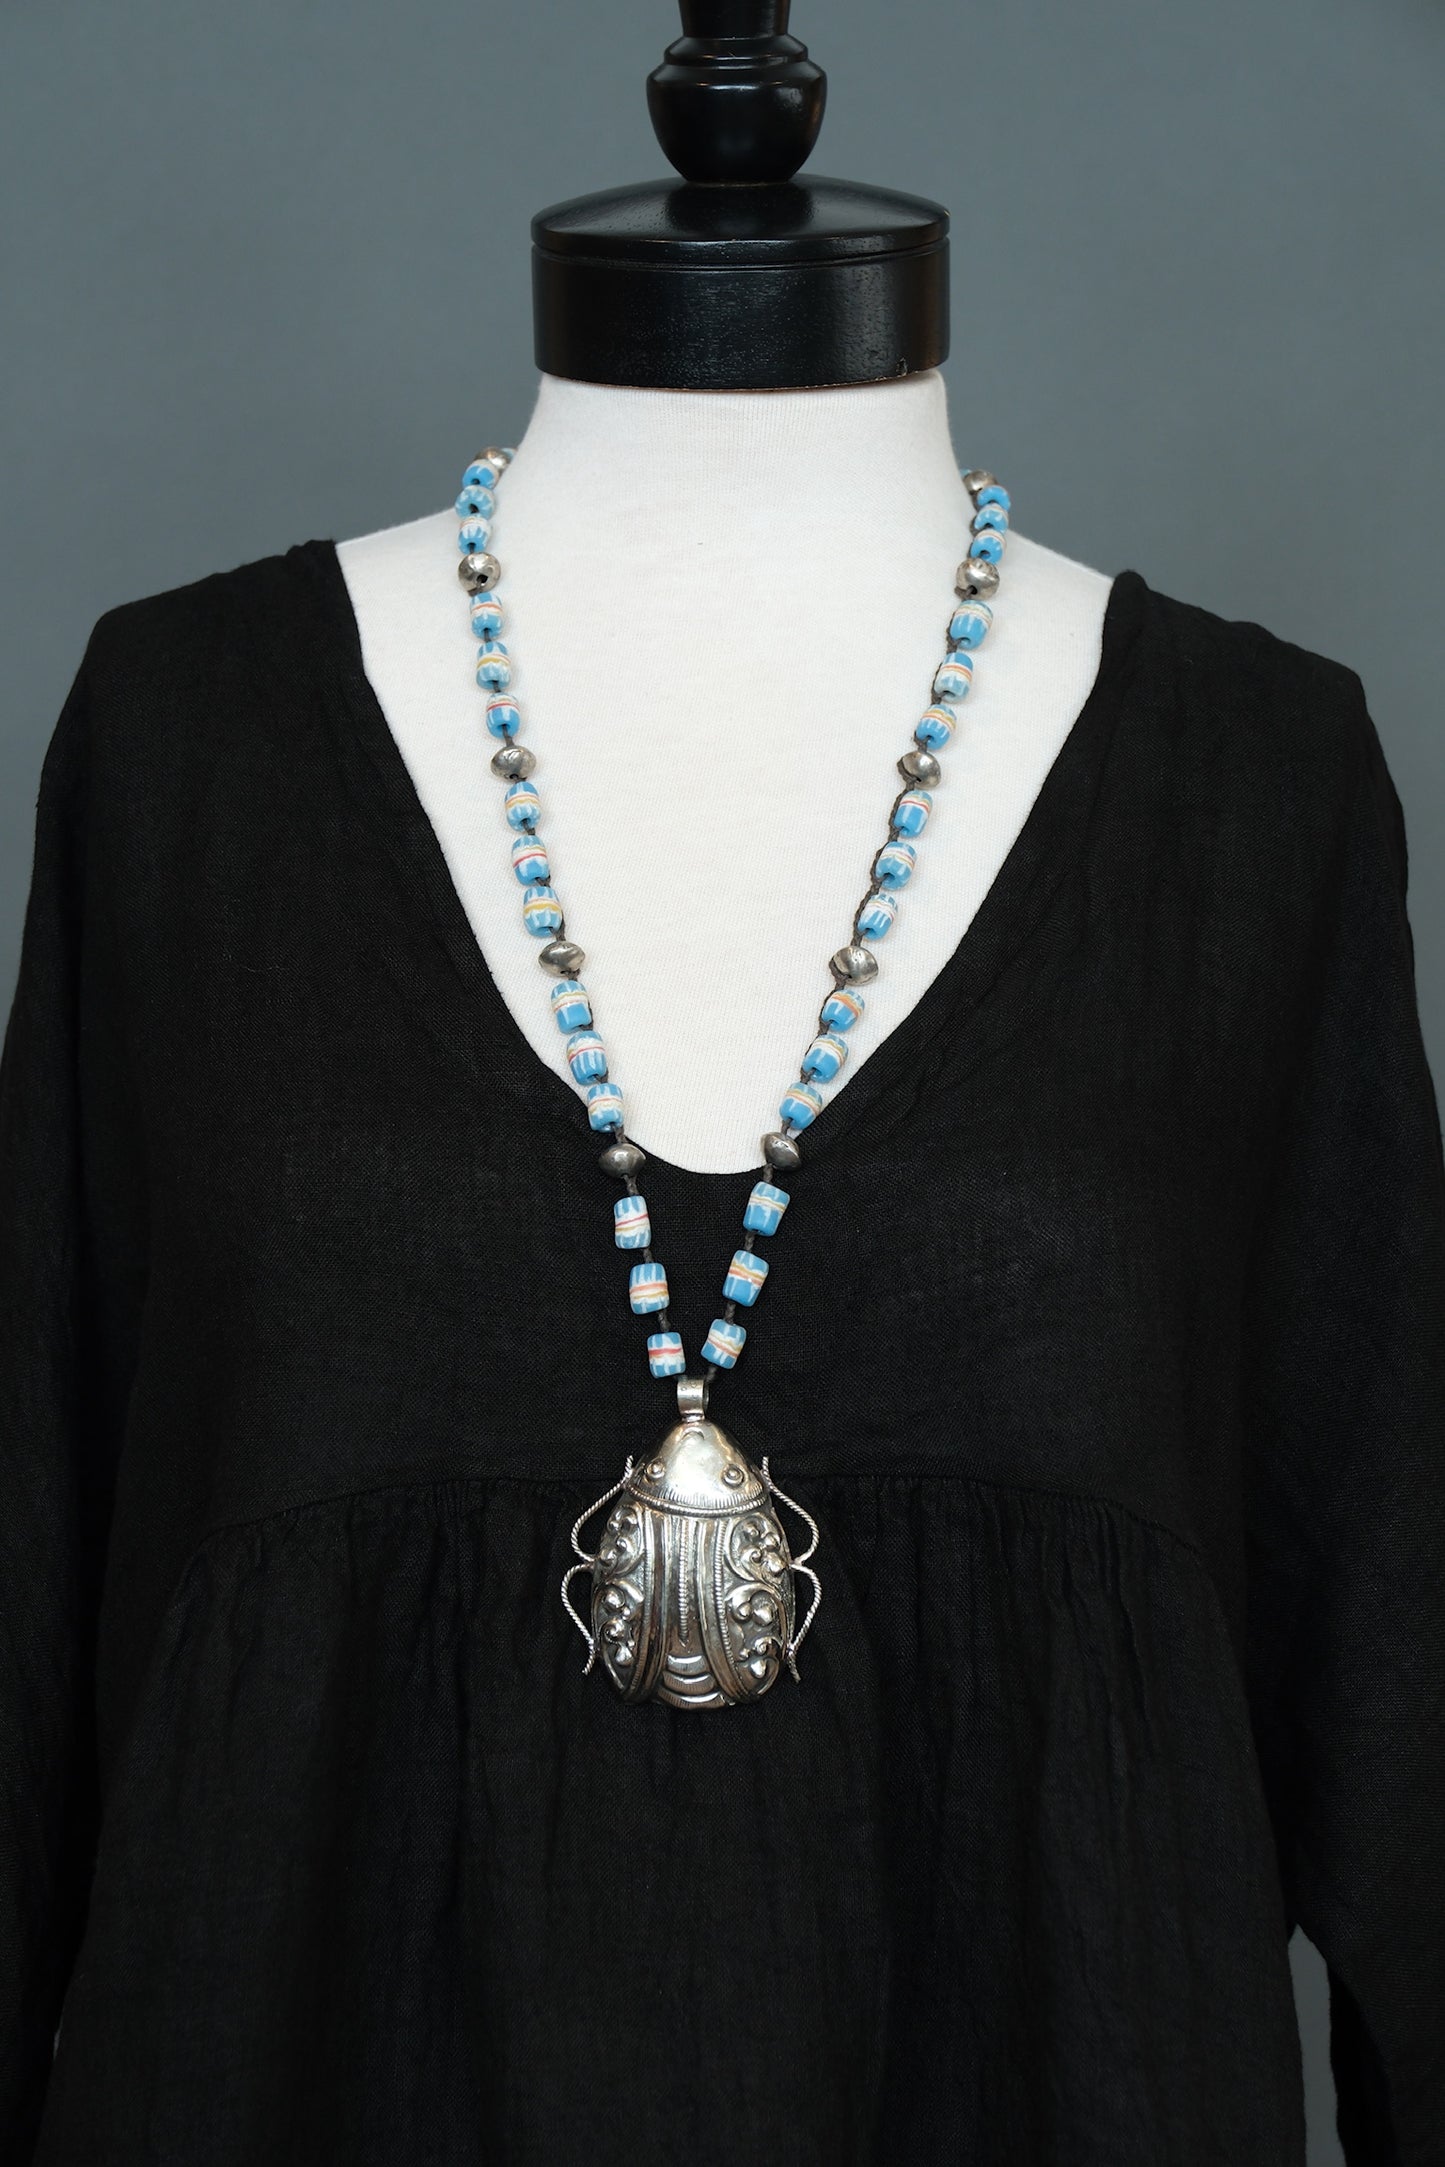 Beetle Pendent Necklace with African Blue Trade Beads